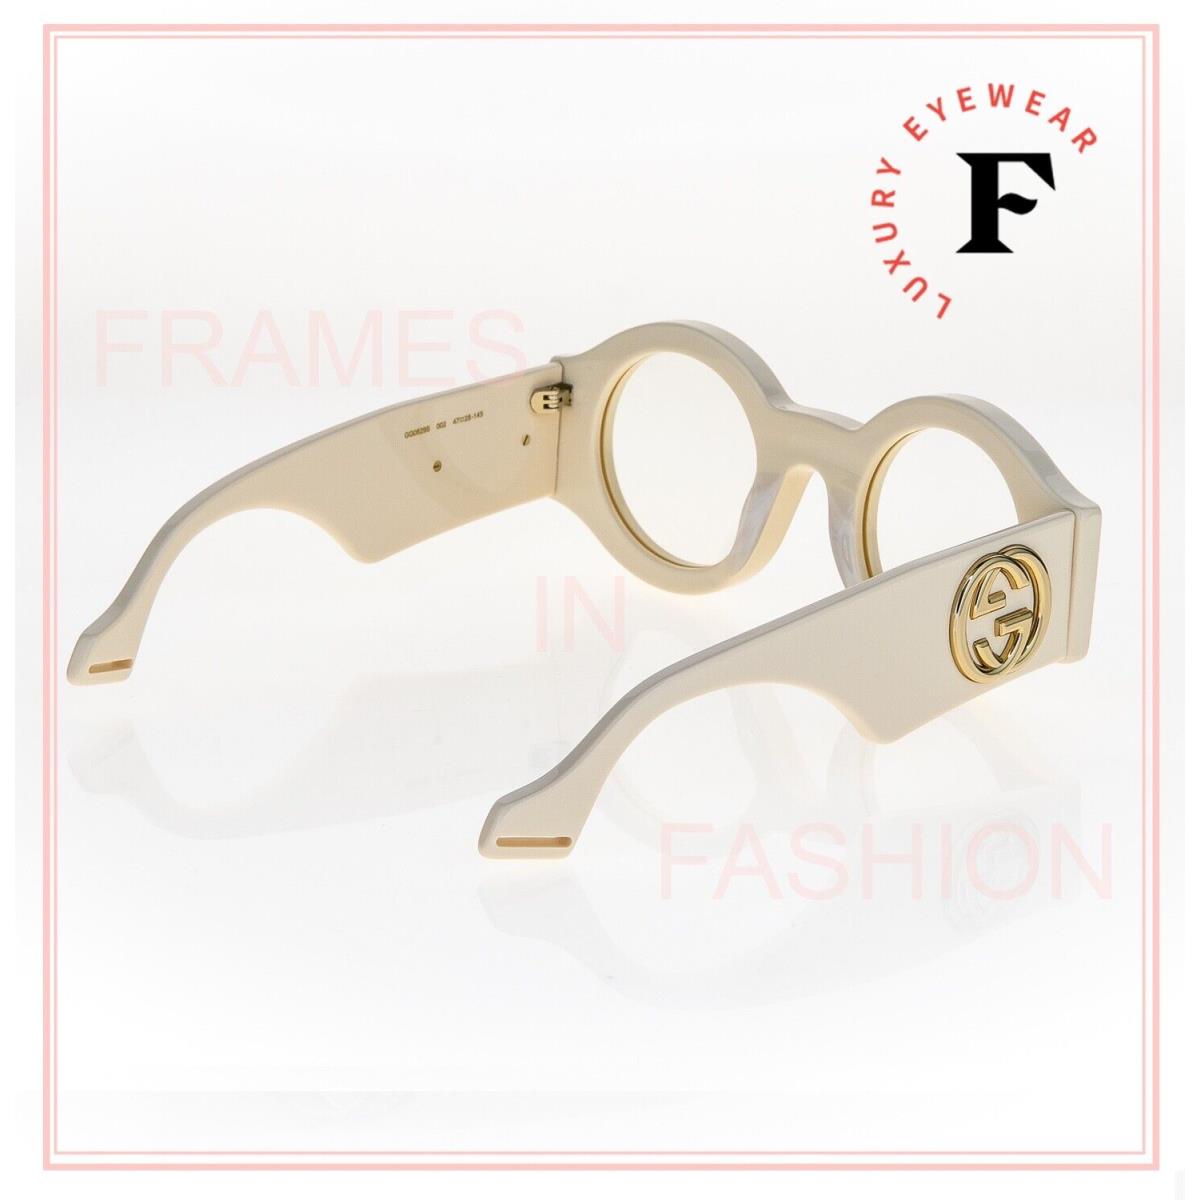 Gucci sunglasses  - 002 , Ivory Frame, Clear Lens